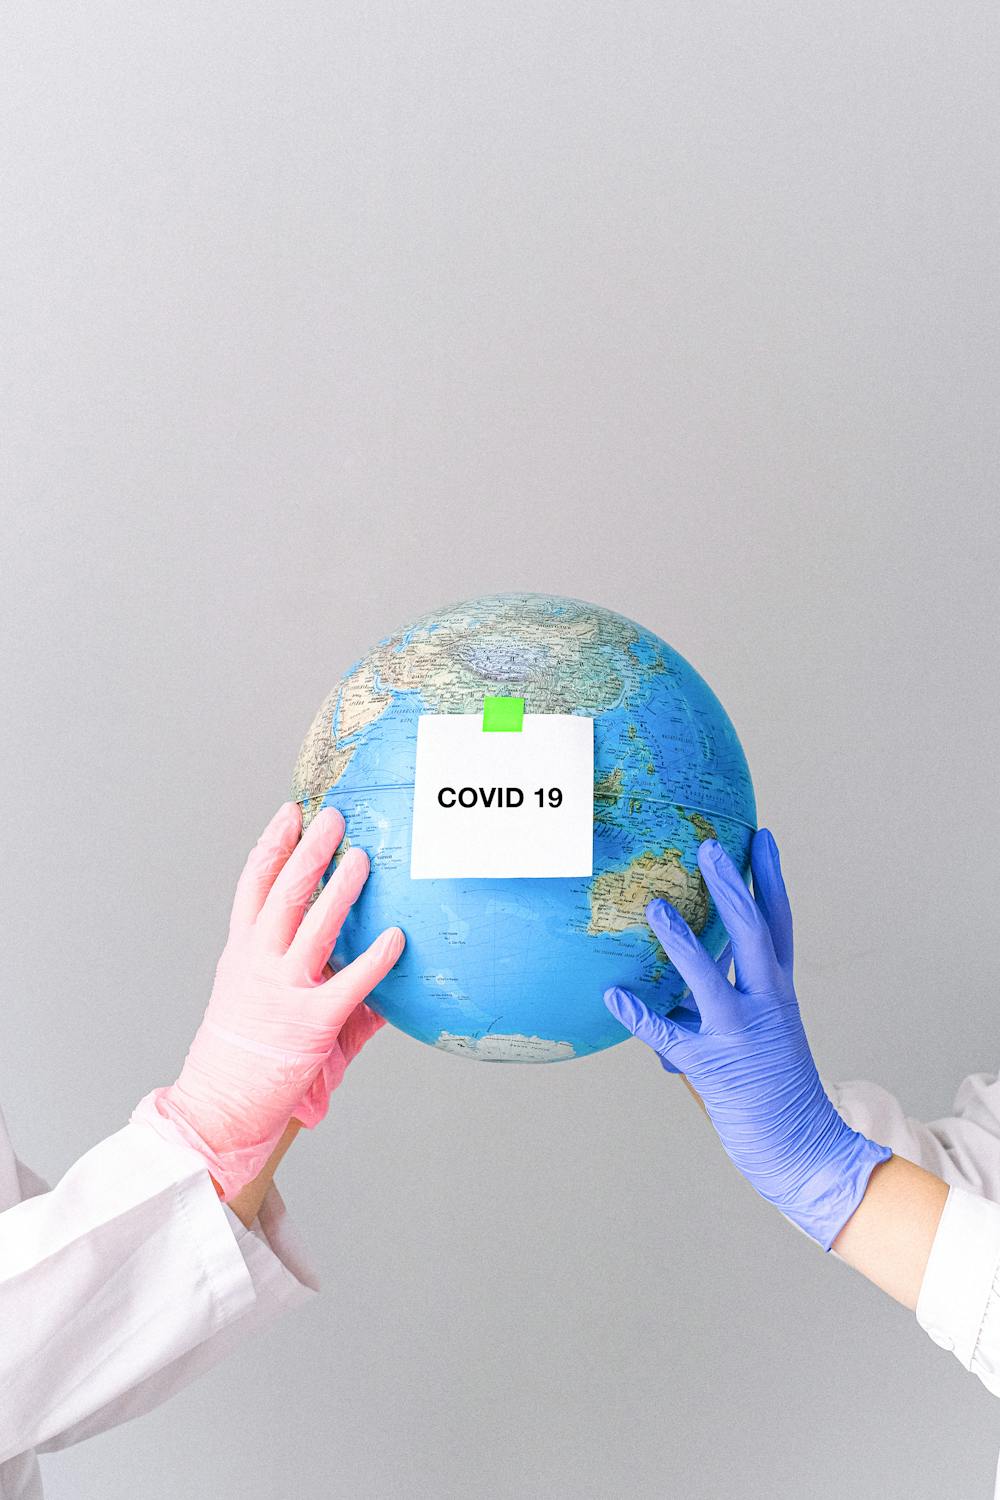 Hands with latex gloves holding a globe